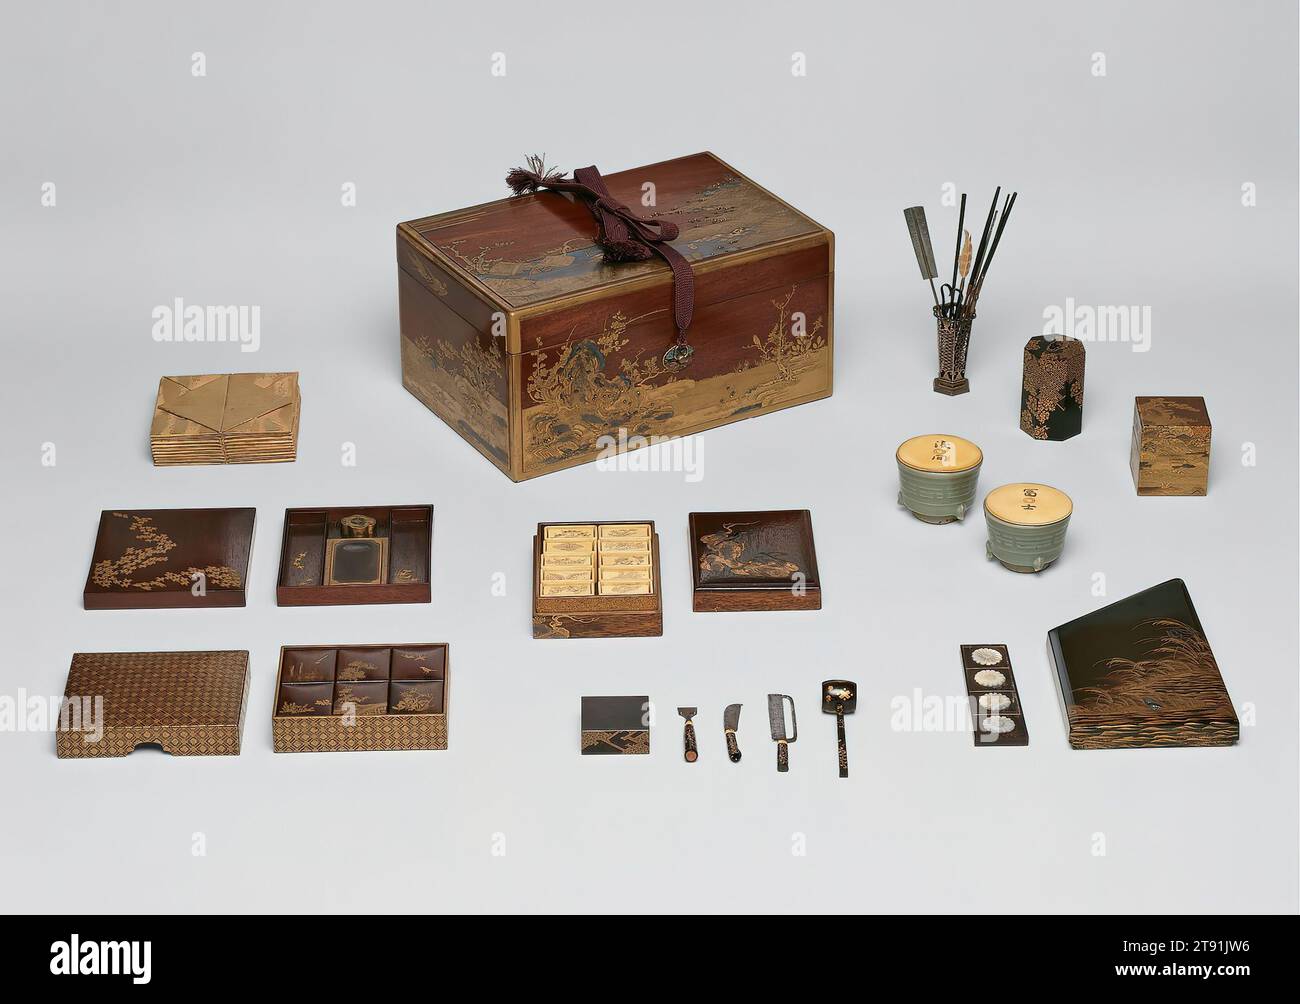 Box and assorted implements for the incense game, 17th-18th century, Unknown Japanese, 6 × 11 7/8 × 8 in. (15.24 × 30.16 × 20.32 cm), Wood, lacquer, gold; metal utensils, Japan, 17th-18th century, Incense played a prominent role in aristocratic culture of ancient Japan. Aristocrats were expected to know how to mix aromatic imported woods with other plant products and compound them into burnable, fragrant incense. Popular ingredients included aloe, sandalwood, frankincense, pine, lily, cinnamon, and patchouli, among others. In the 1400s, this artful appreciation of incense developed further Stock Photo